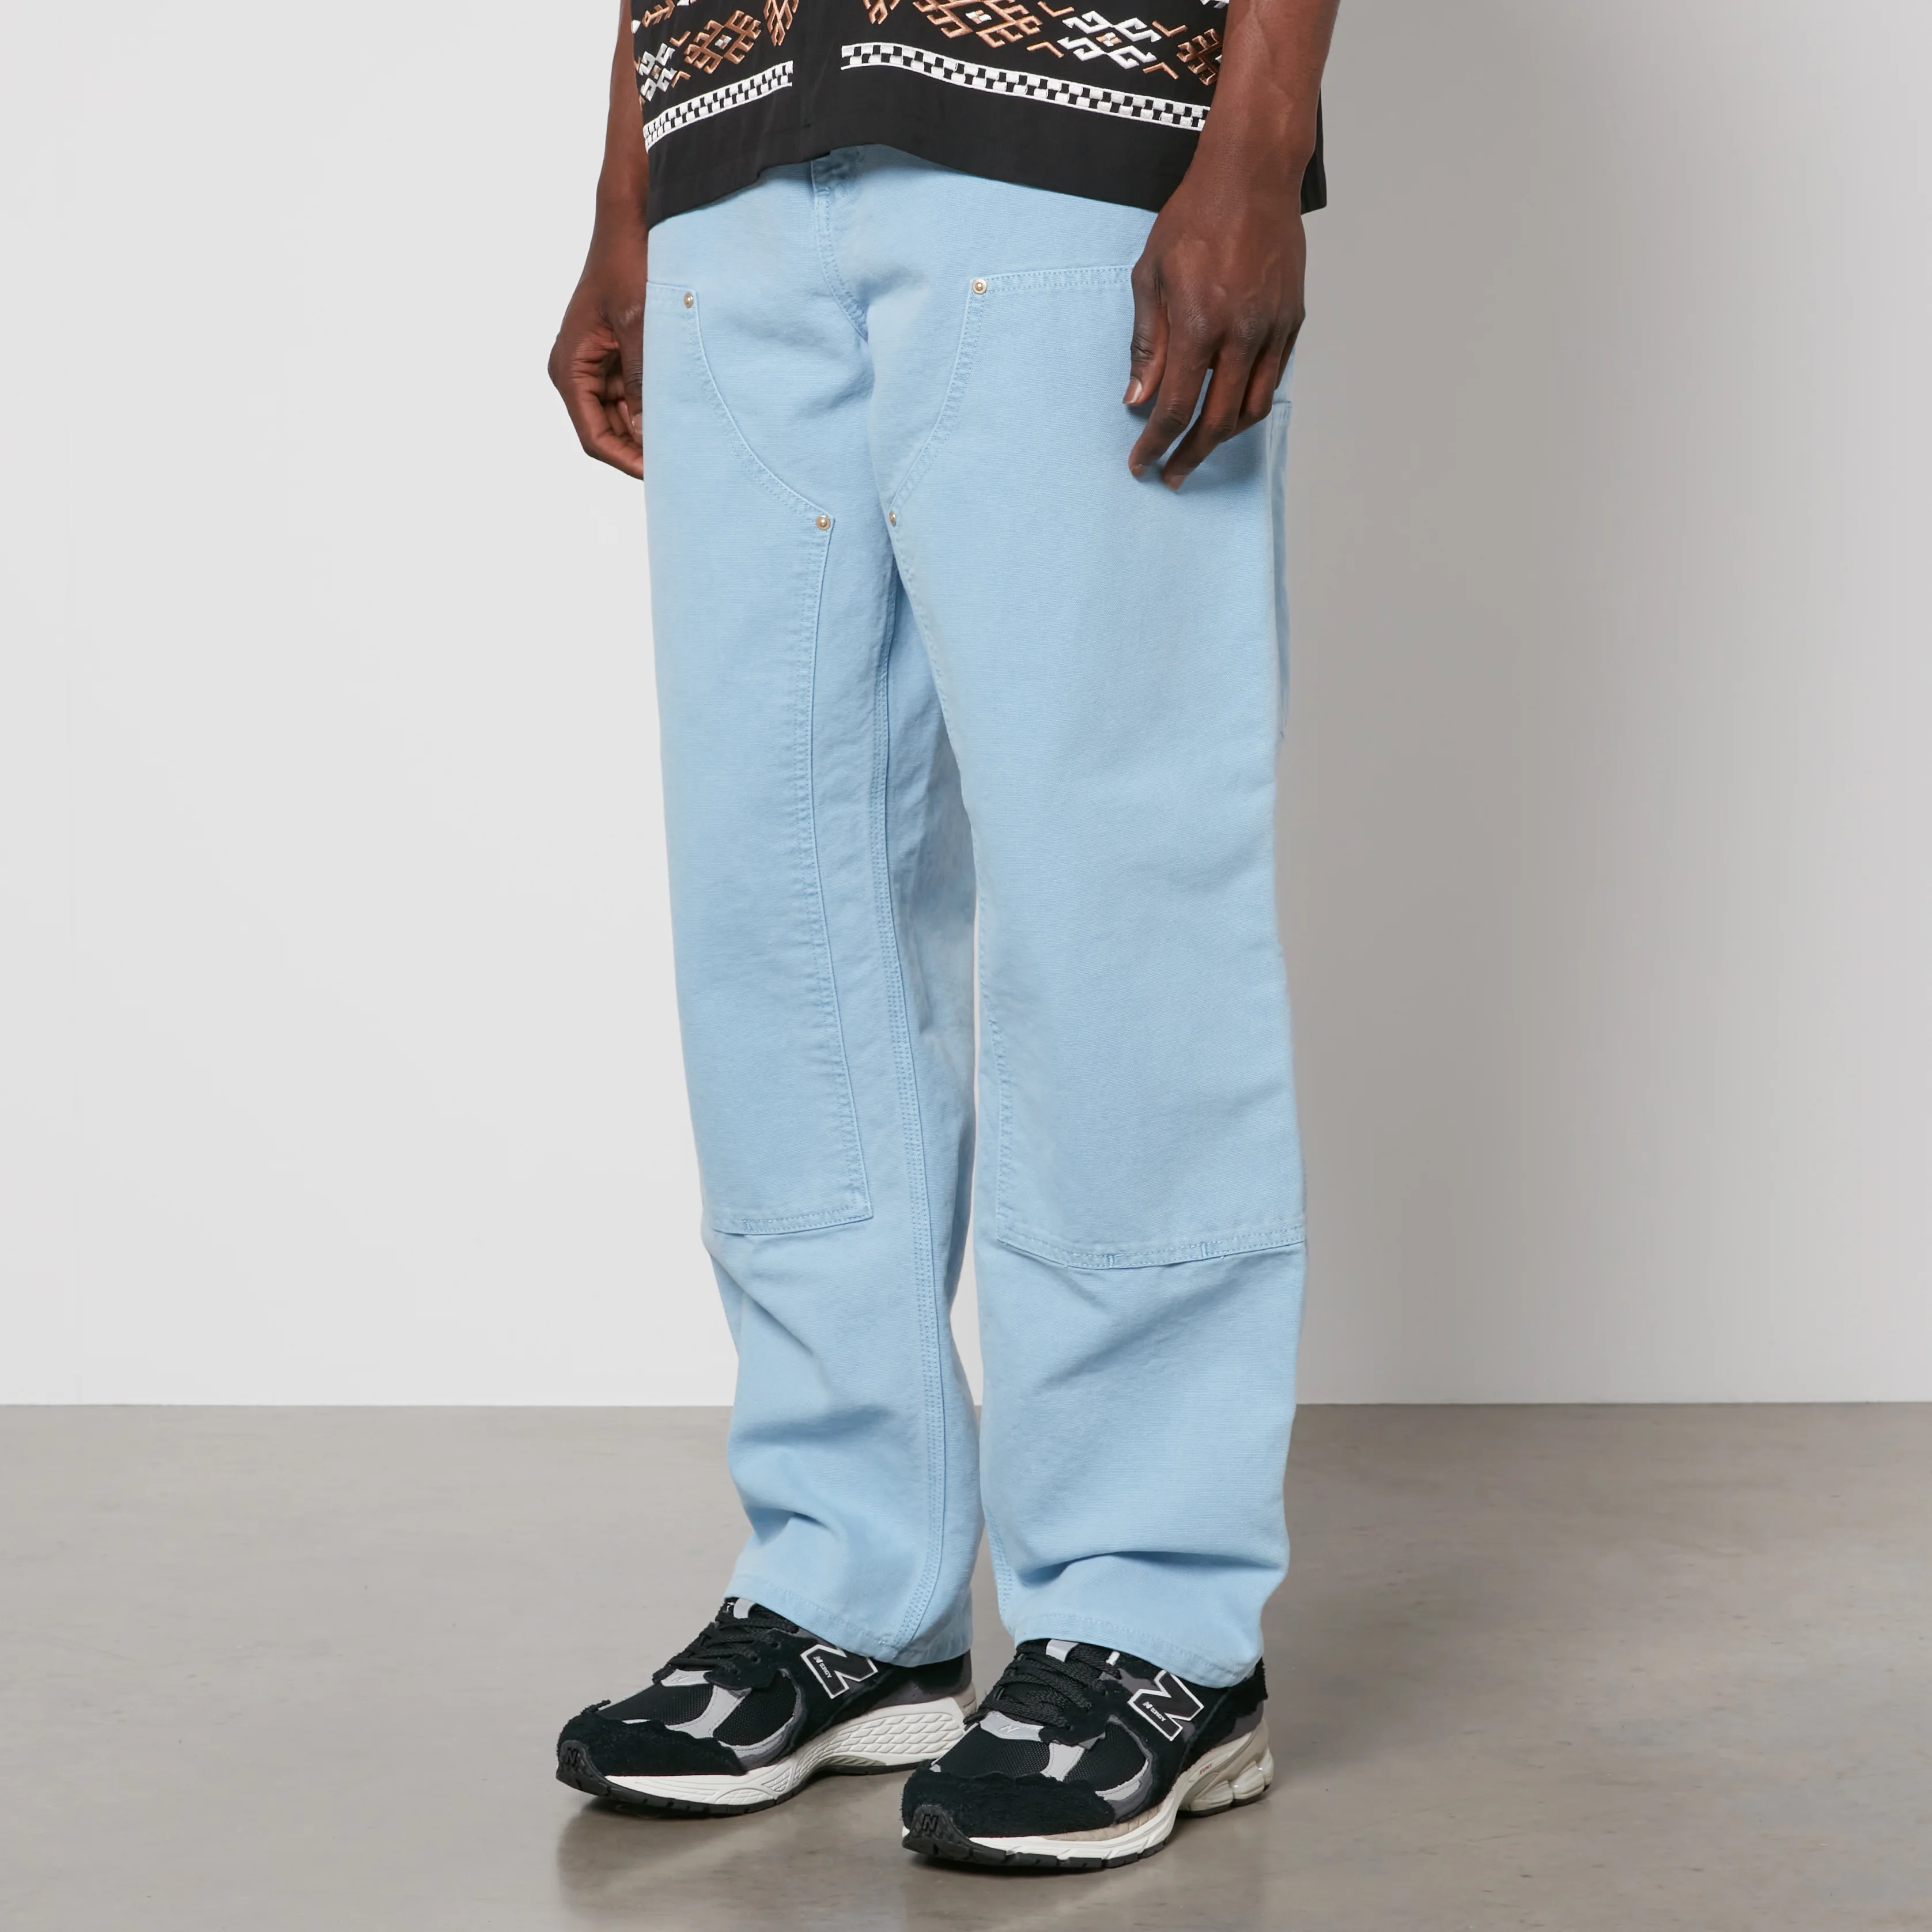 Carhartt Double Knee Cotton Trousers Image 1